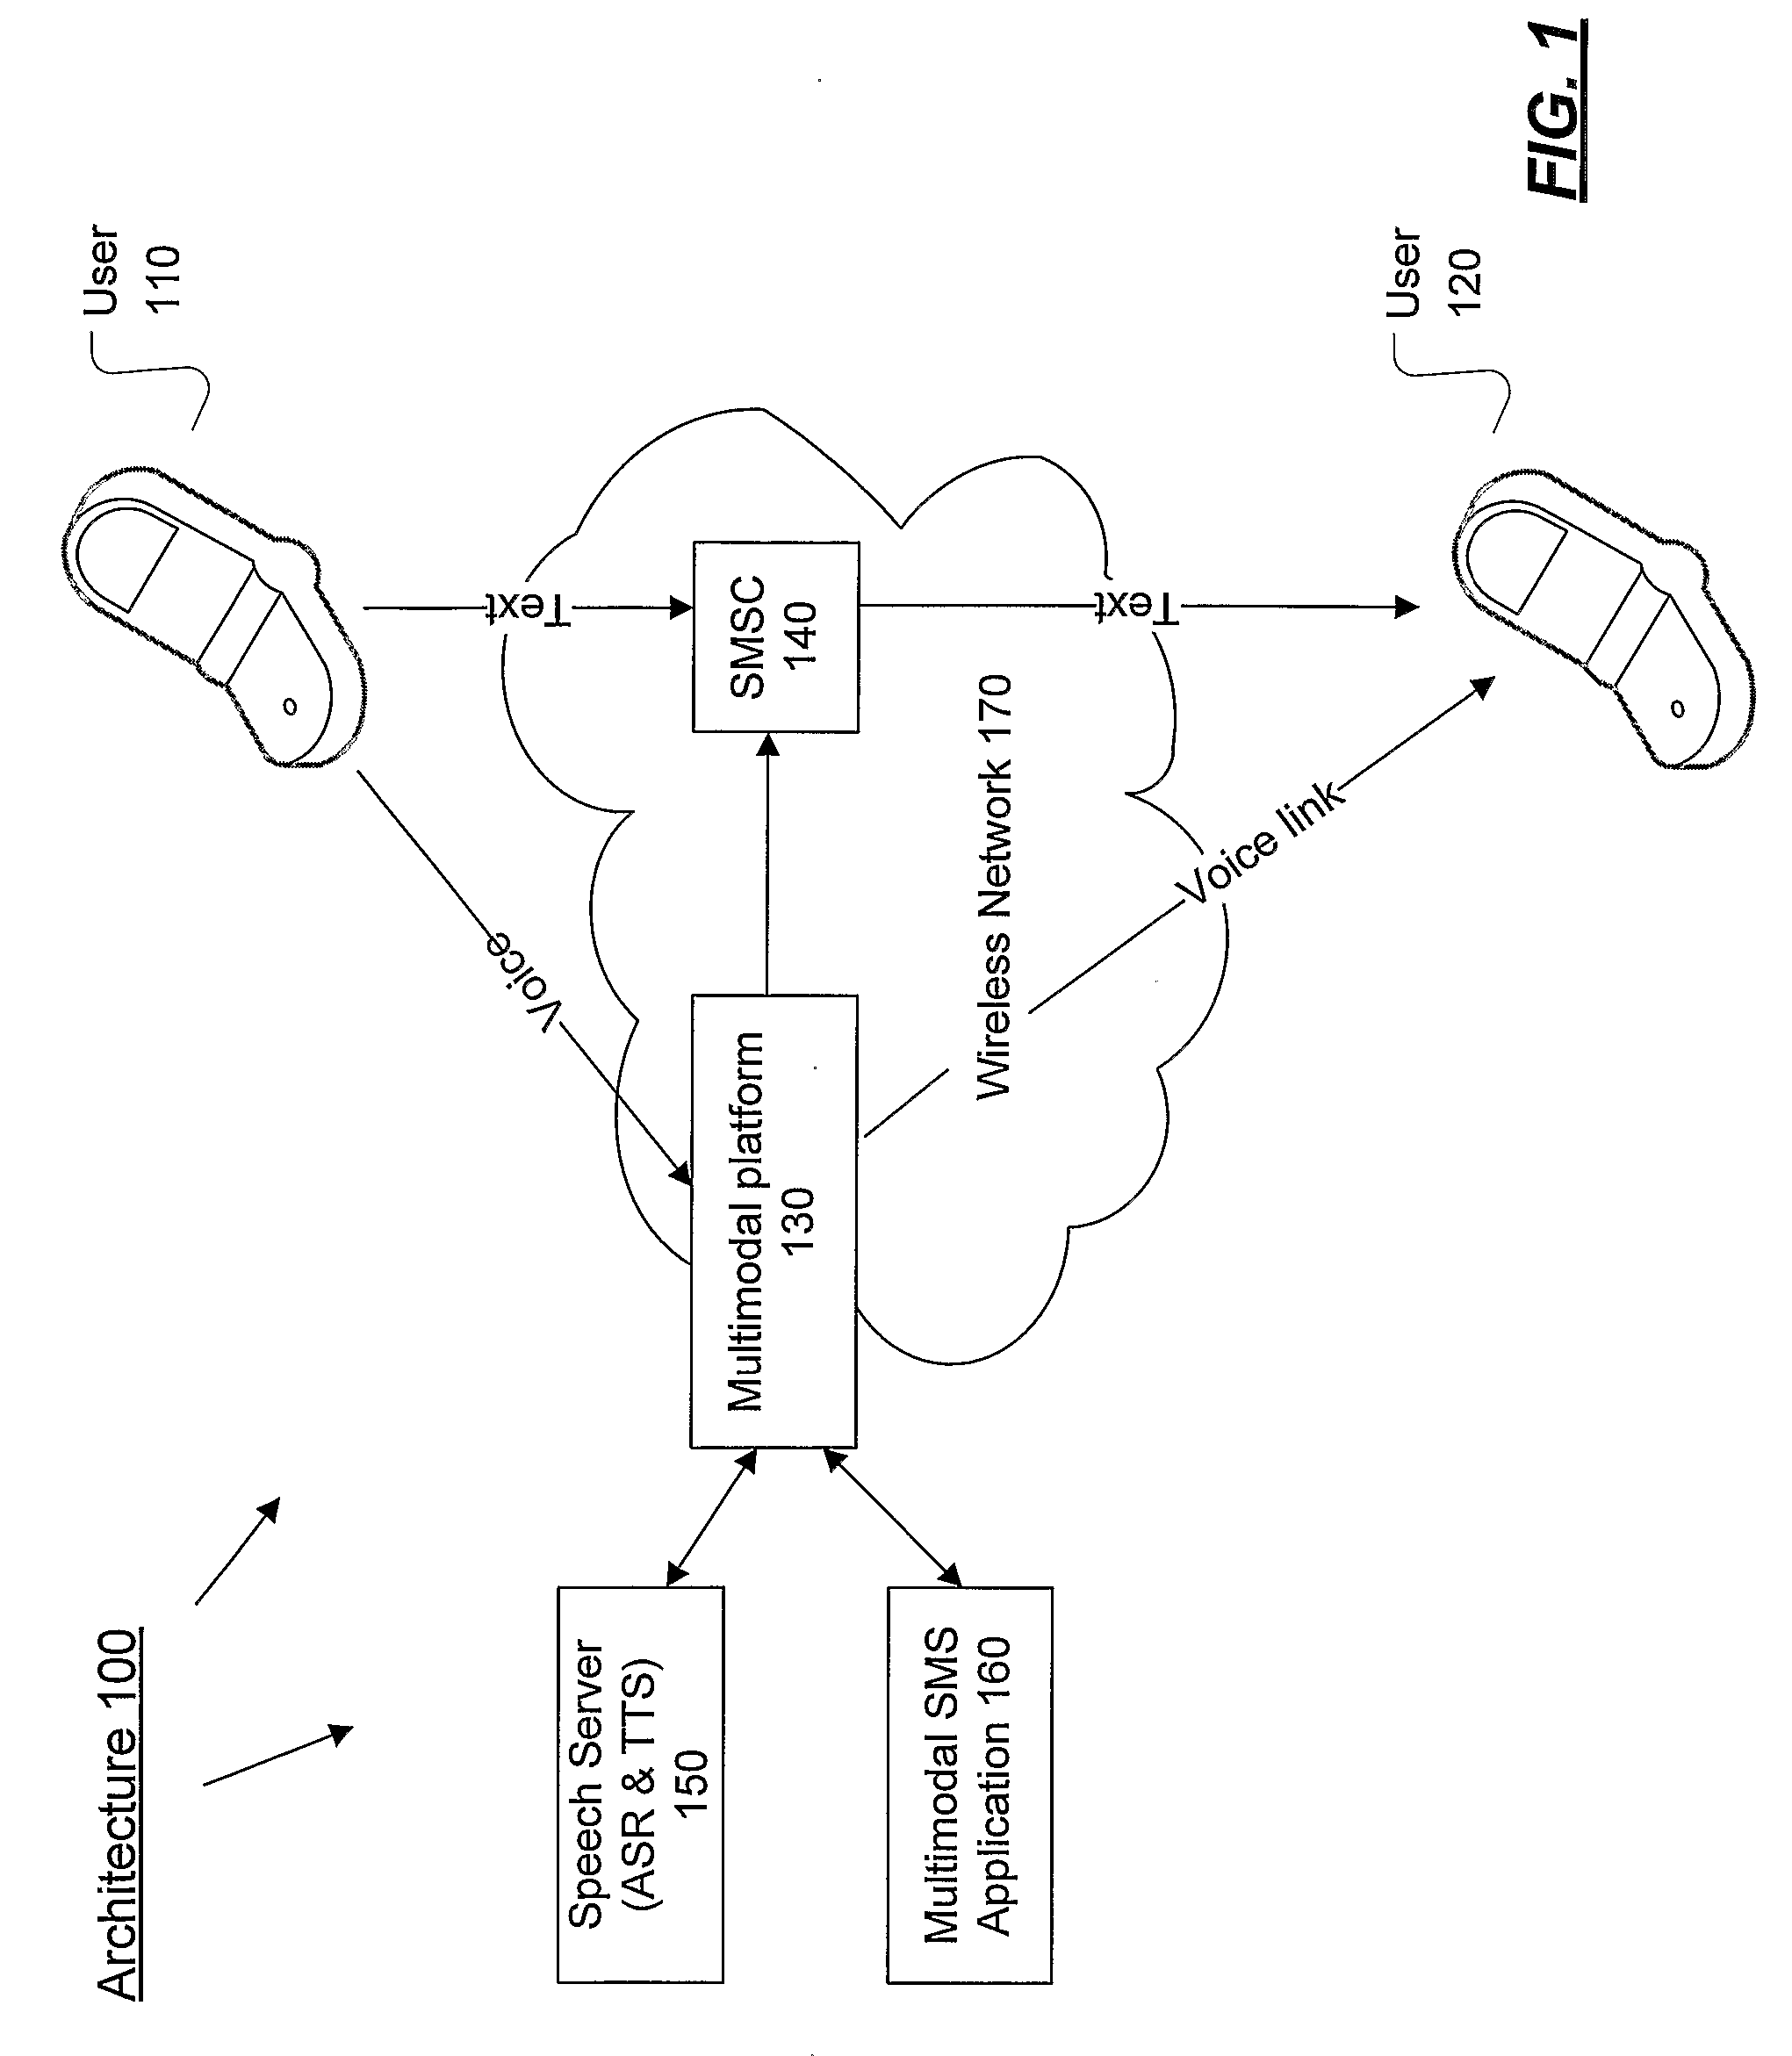 Methods for Identifying Messages and Communicating with Users of a Multimodal Message Service